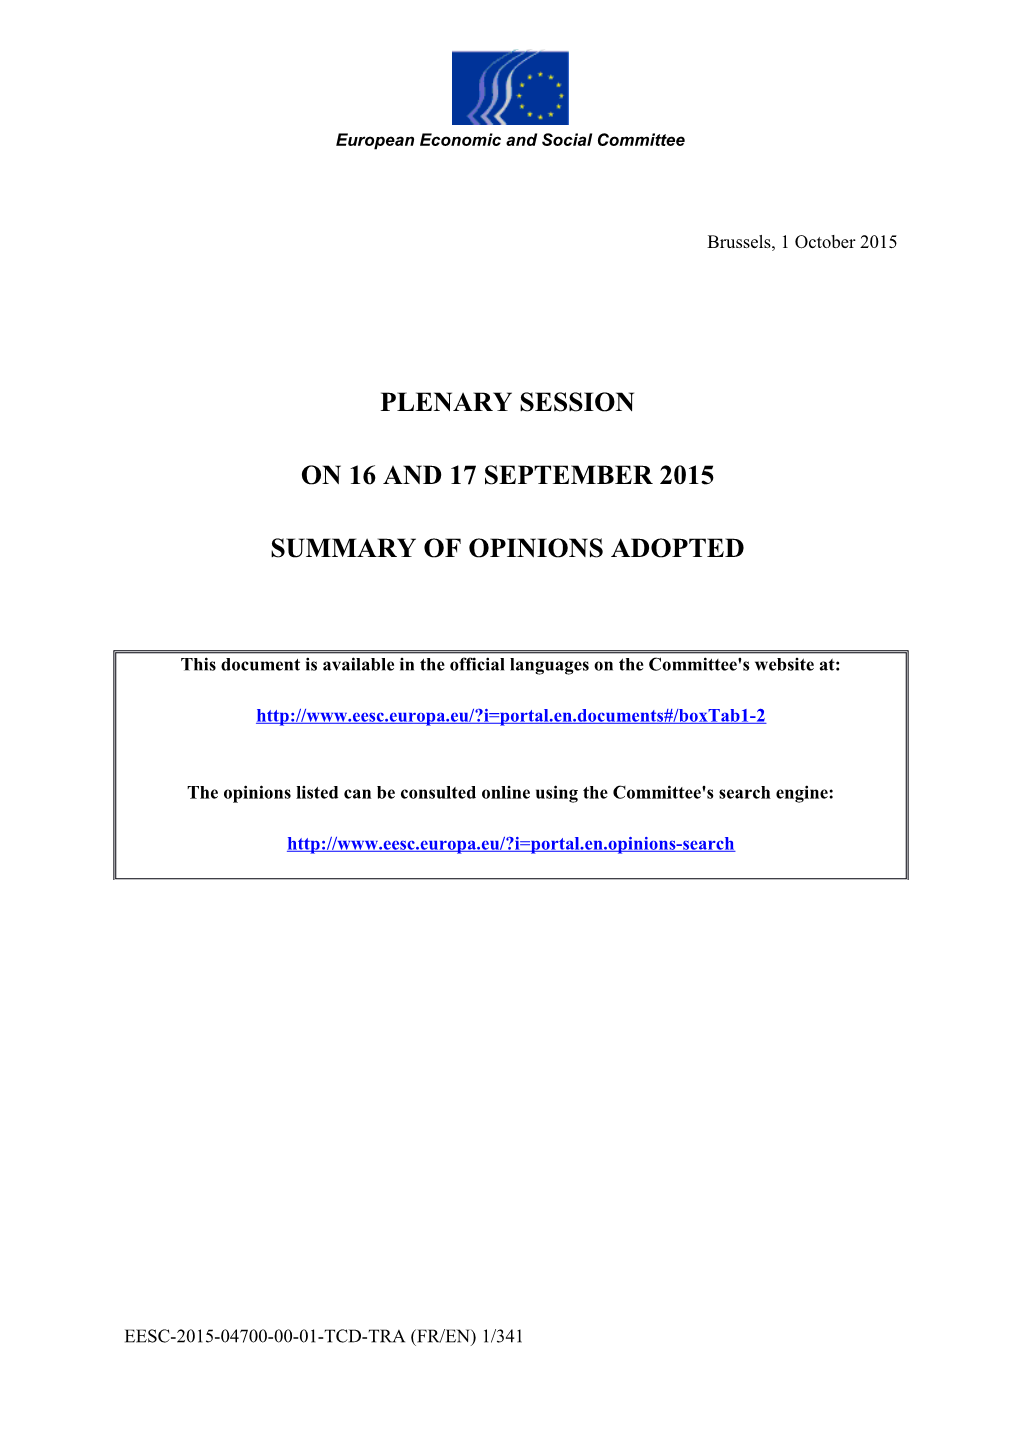 Summary of Opinions Adopted - 510Th Plenary Session 16-17 September 2015